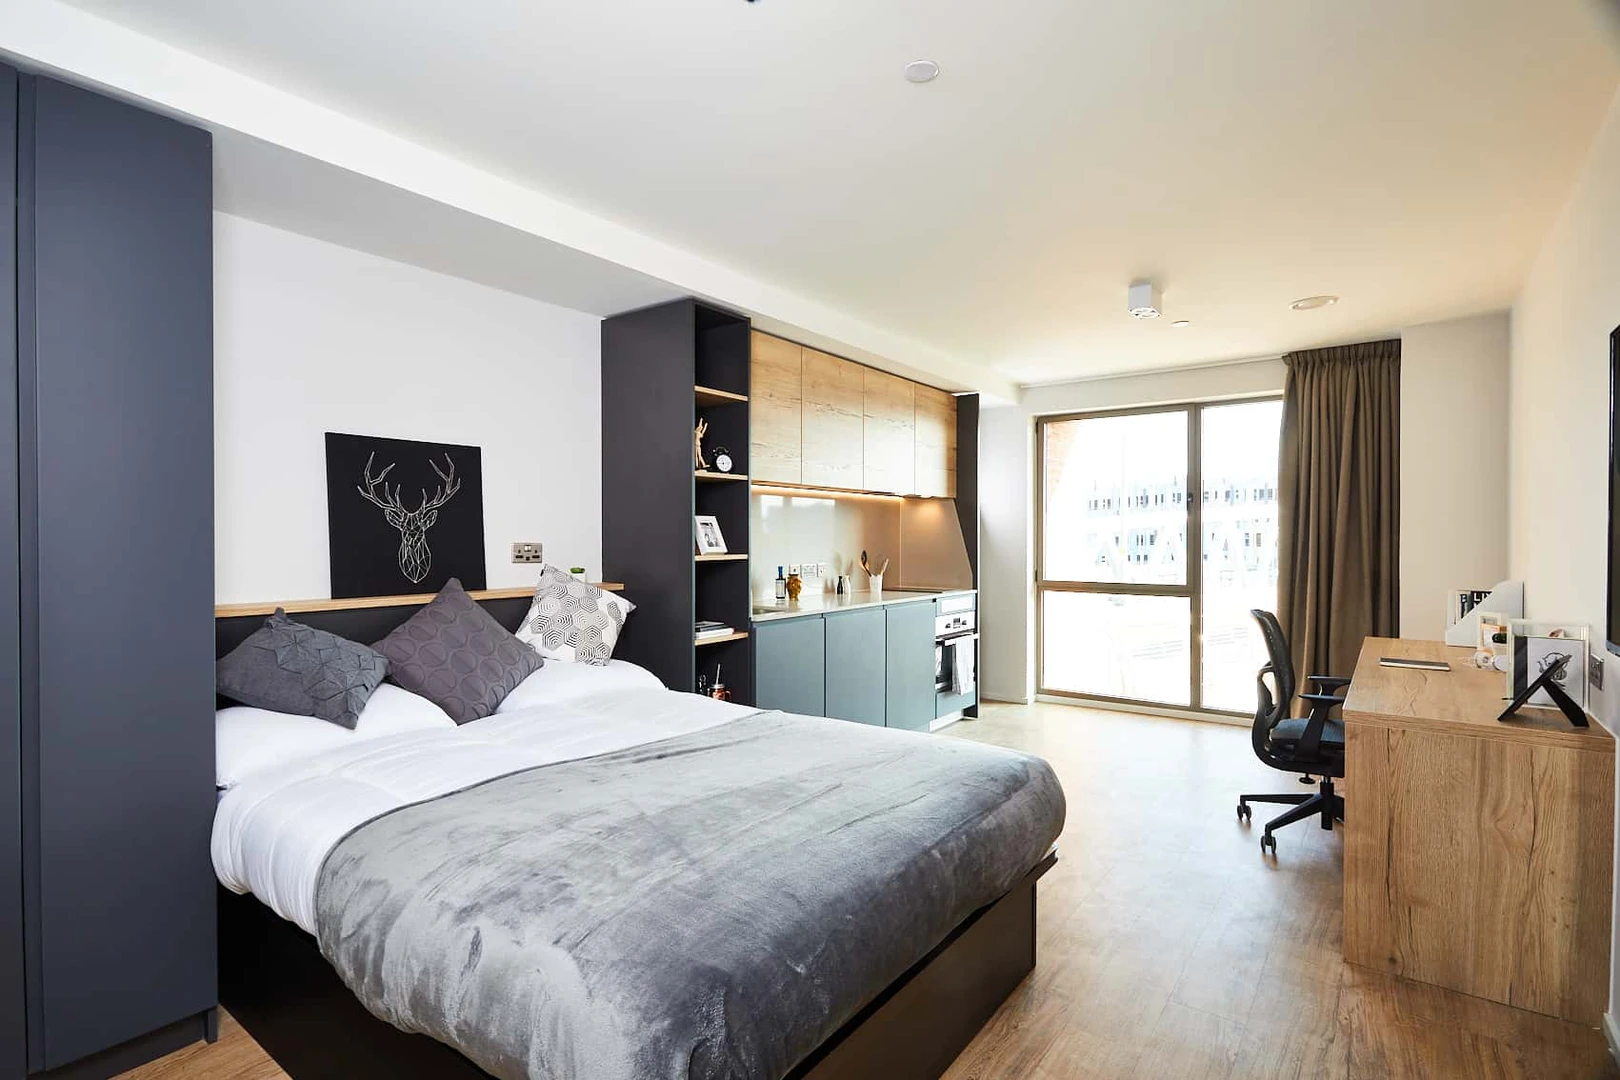 Accommodation in the centre of Nottingham